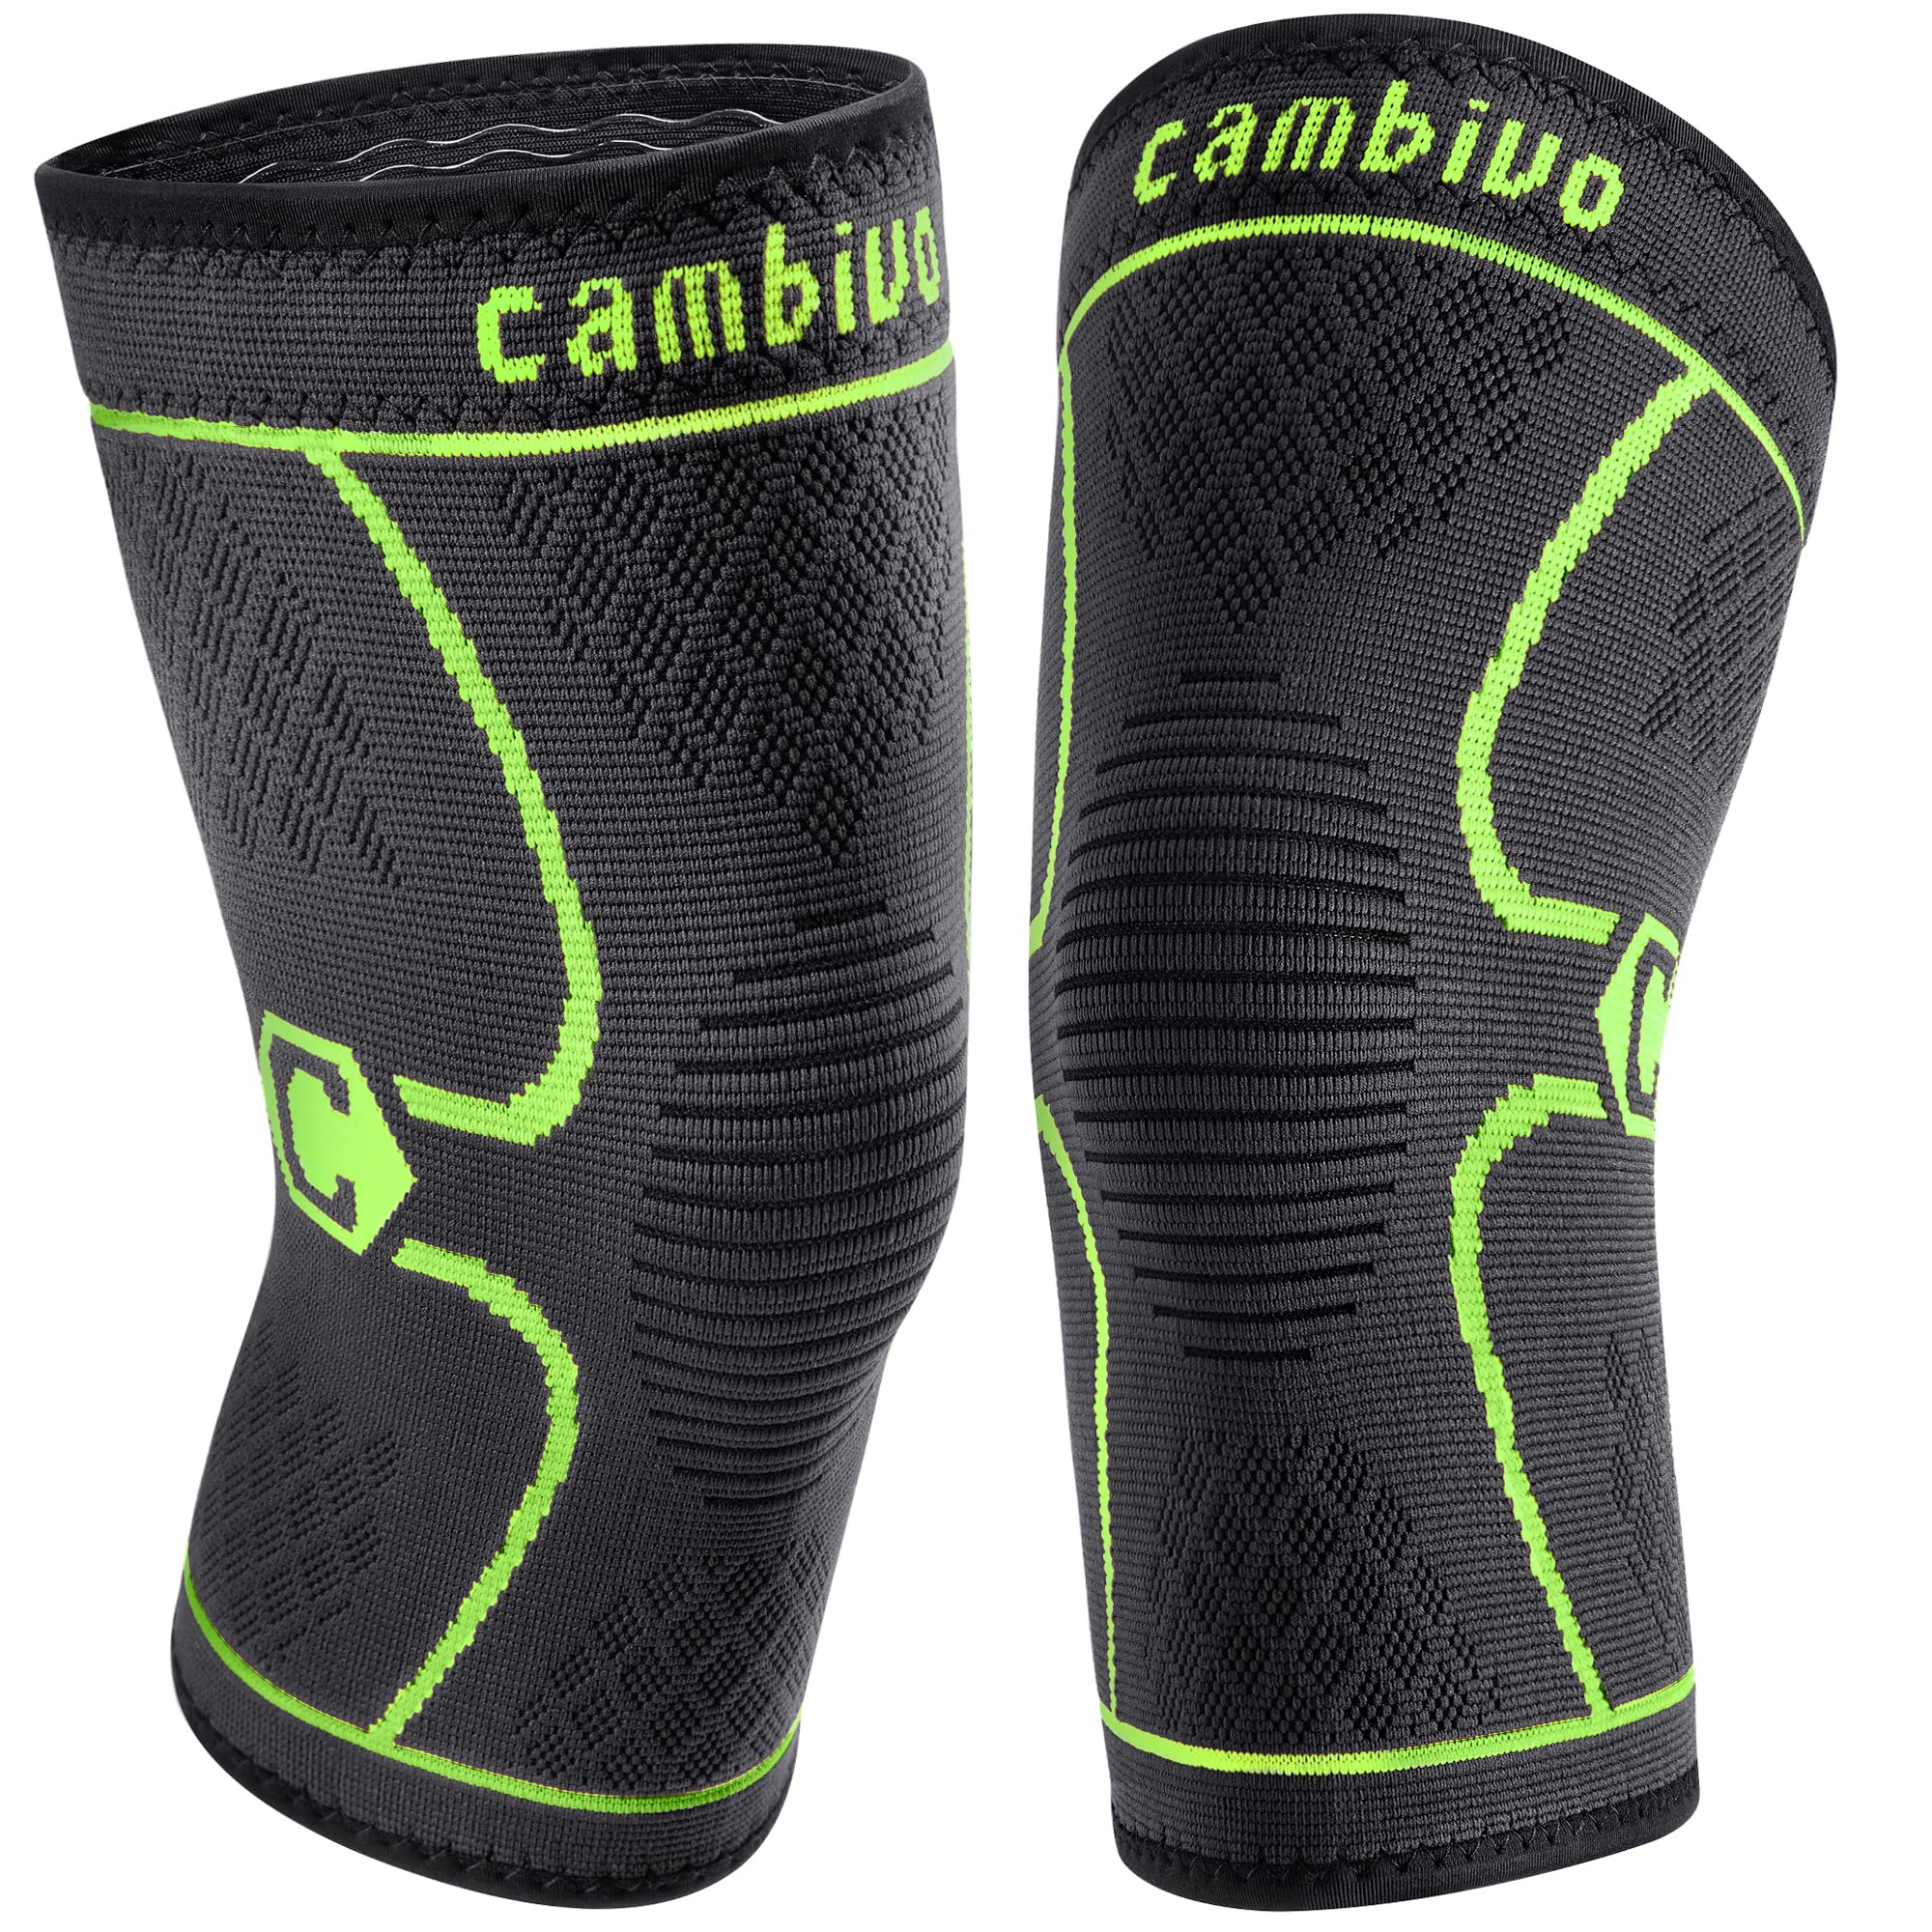 CAMBIVO 2 Pack Knee Brace, Knee Compression Sleeve for Men and Women, Knee  Support for Running, Workout, Gym, Hiking, Sports (Green,X-Large)